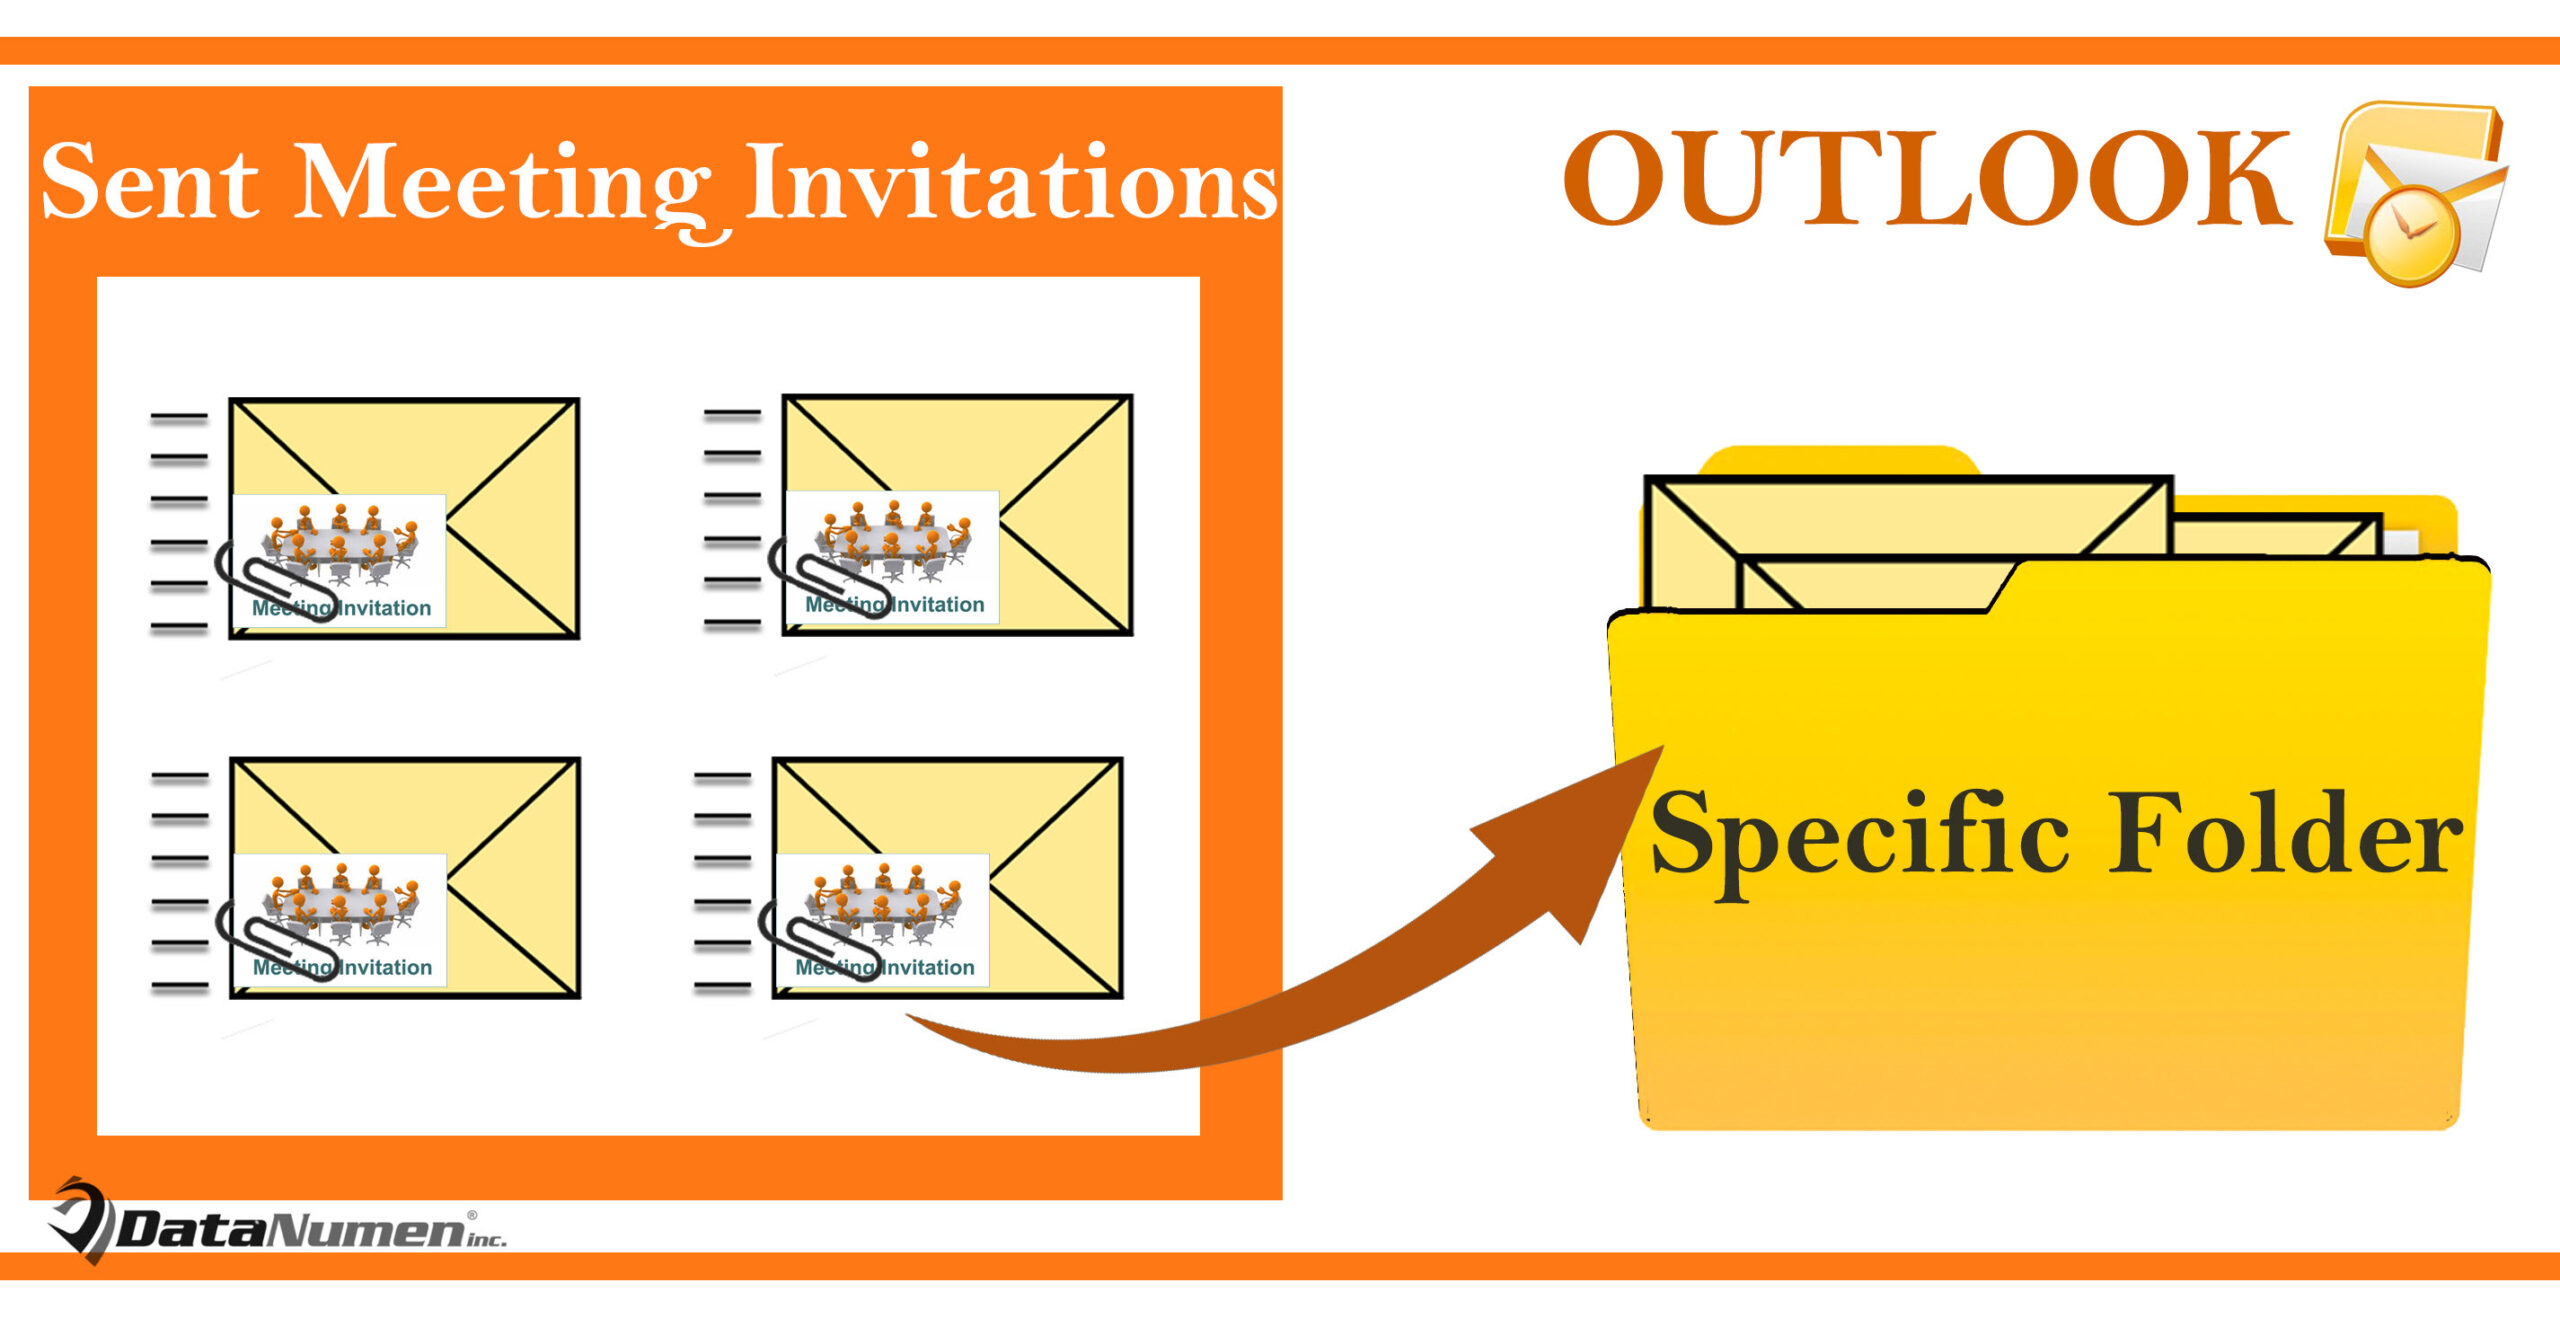 Auto Move Sent Meeting Invitations to a Specific Folder in Your Outlook